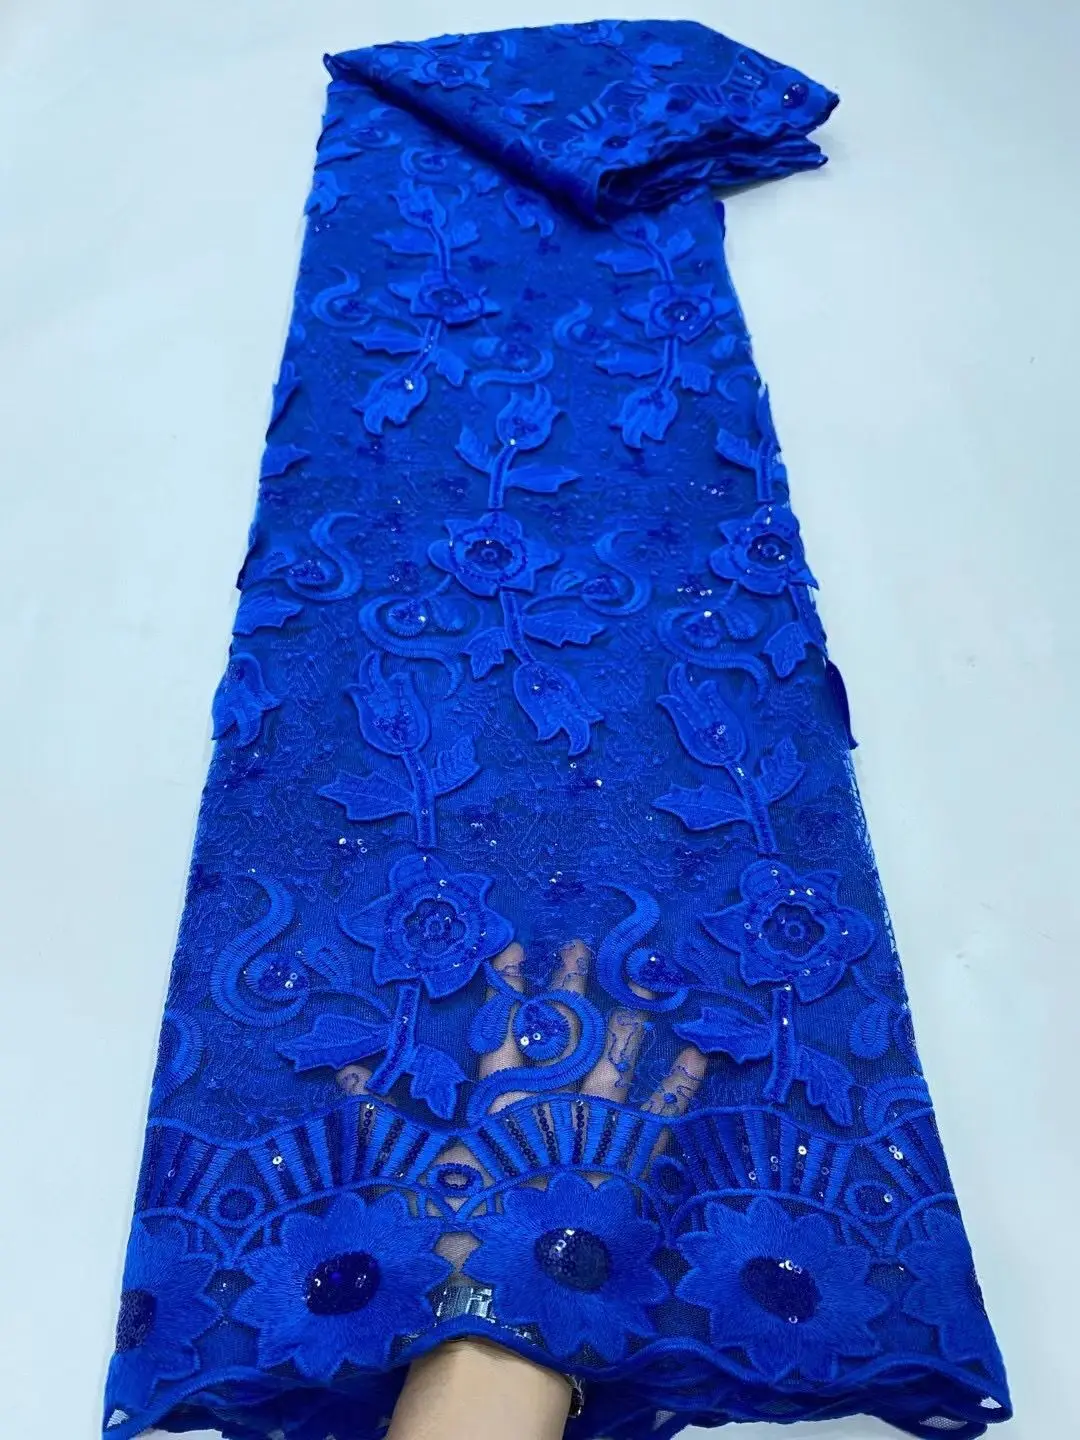 

LACE High Quality Swiss Voile Lace In Switzerland with Stones Eyelet Holes Nigerian African Lace Fabric for Party Sew